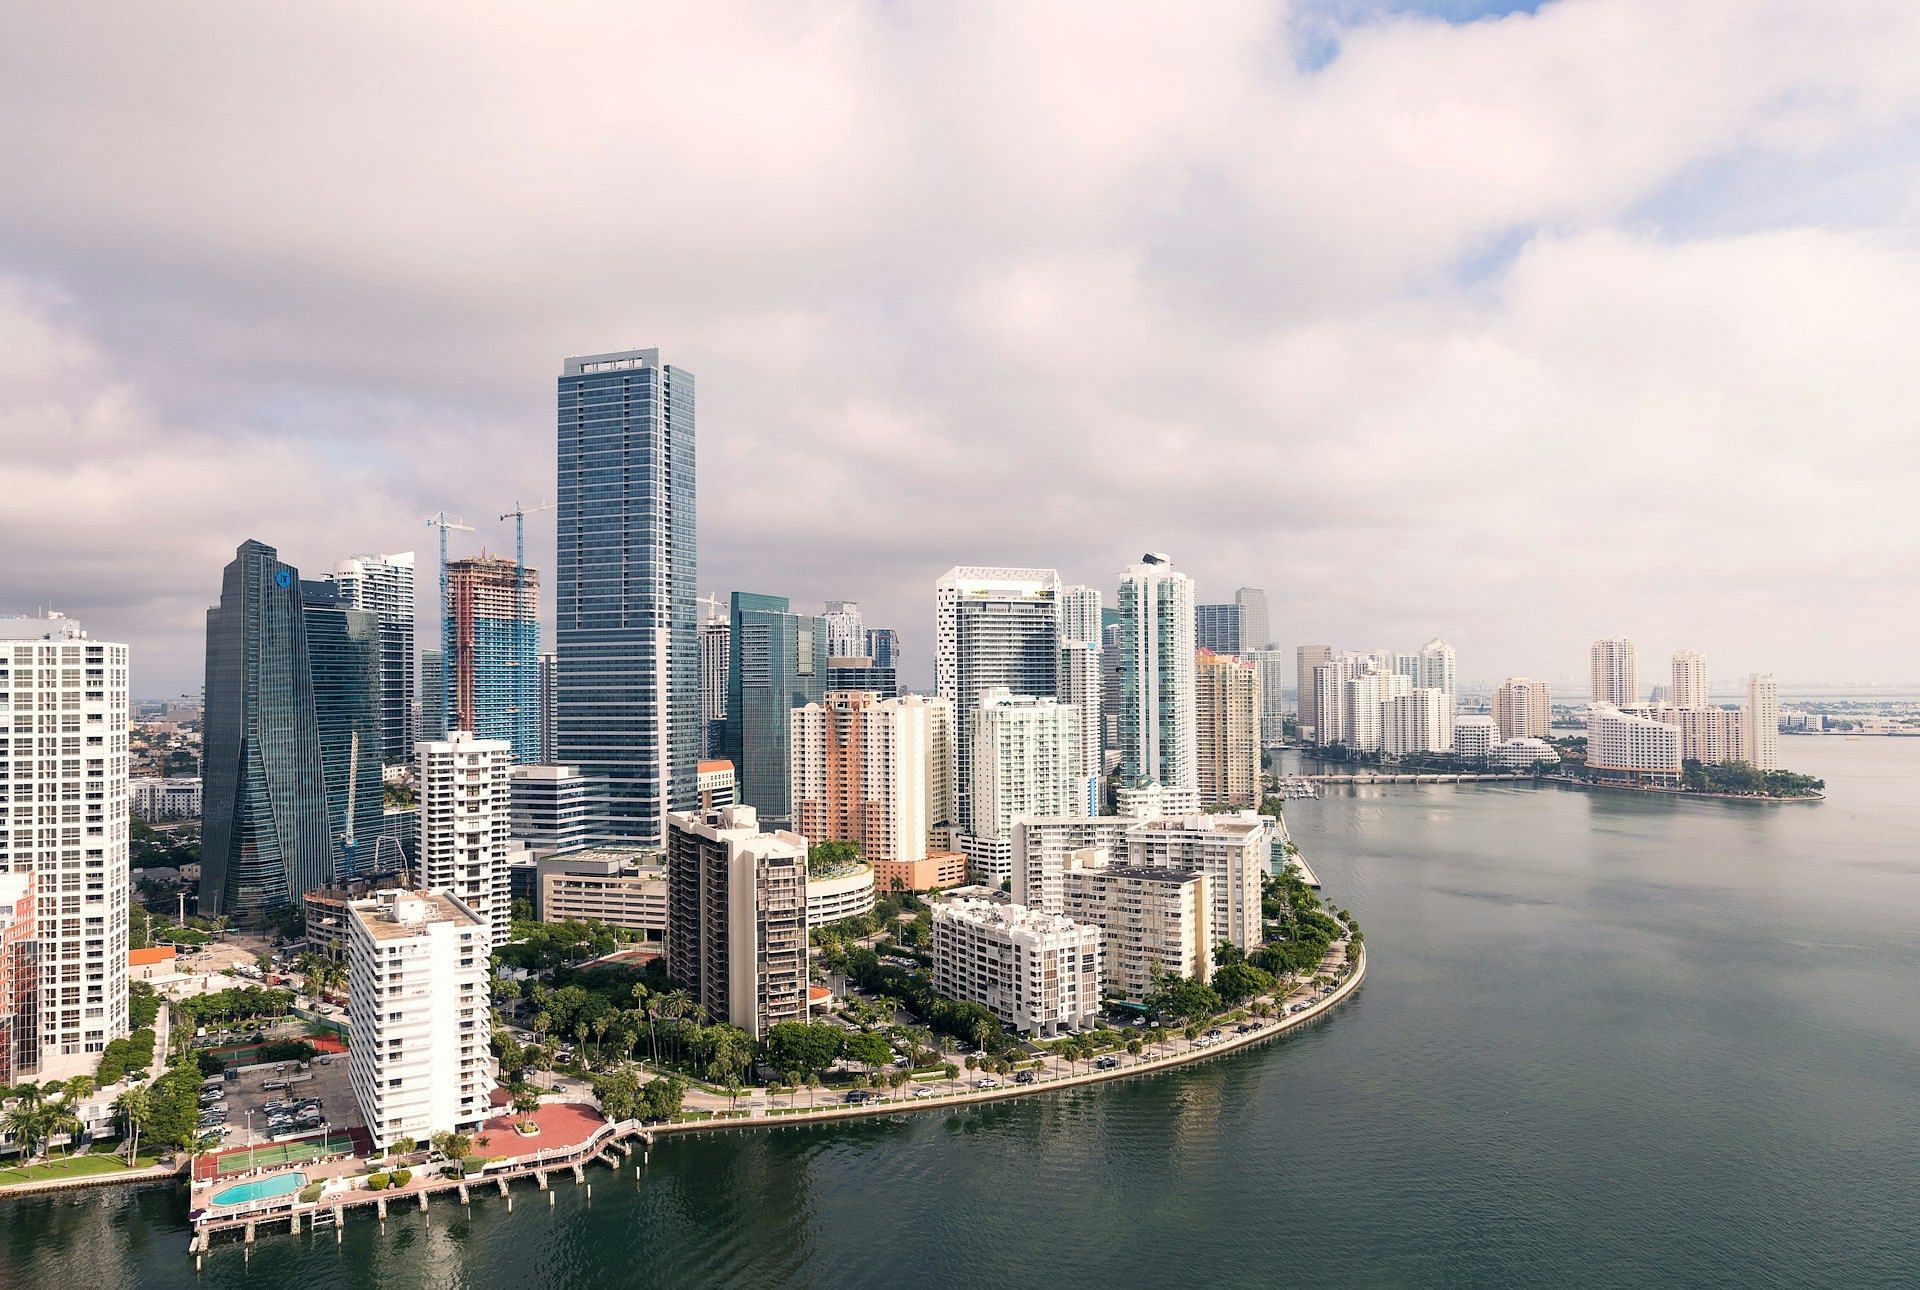 The show has also been shot in Miami, Florida, the place where the story originally takes place (Image via Unsplash/Ryan Parker)